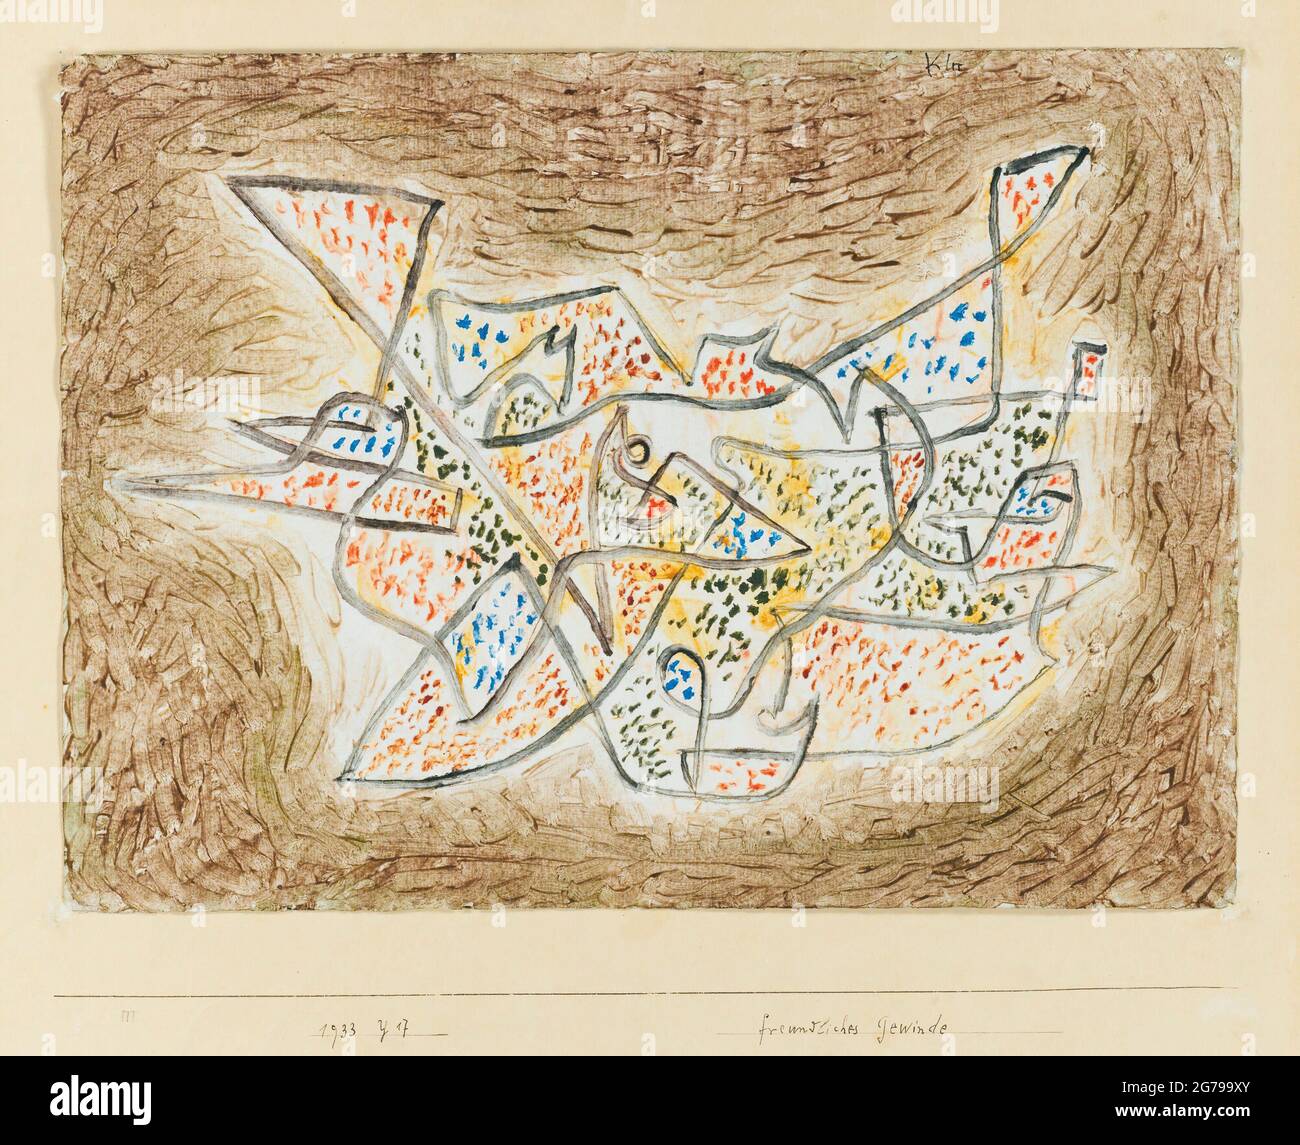 Freundliches Gewinde (Friendly Meandering). Museum: PRIVATE COLLECTION. Author: PAUL KLEE. Stock Photo